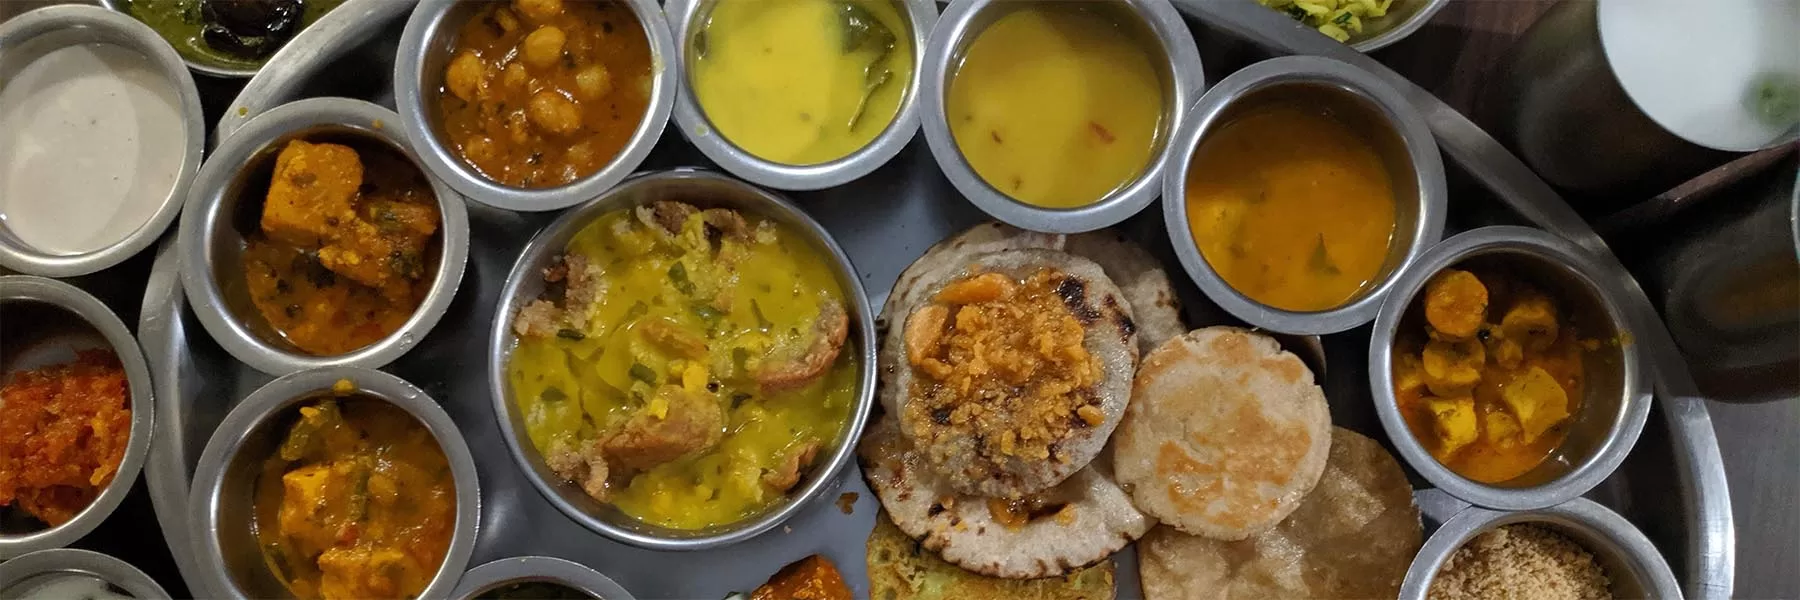 Authentic foods of Rajasthan